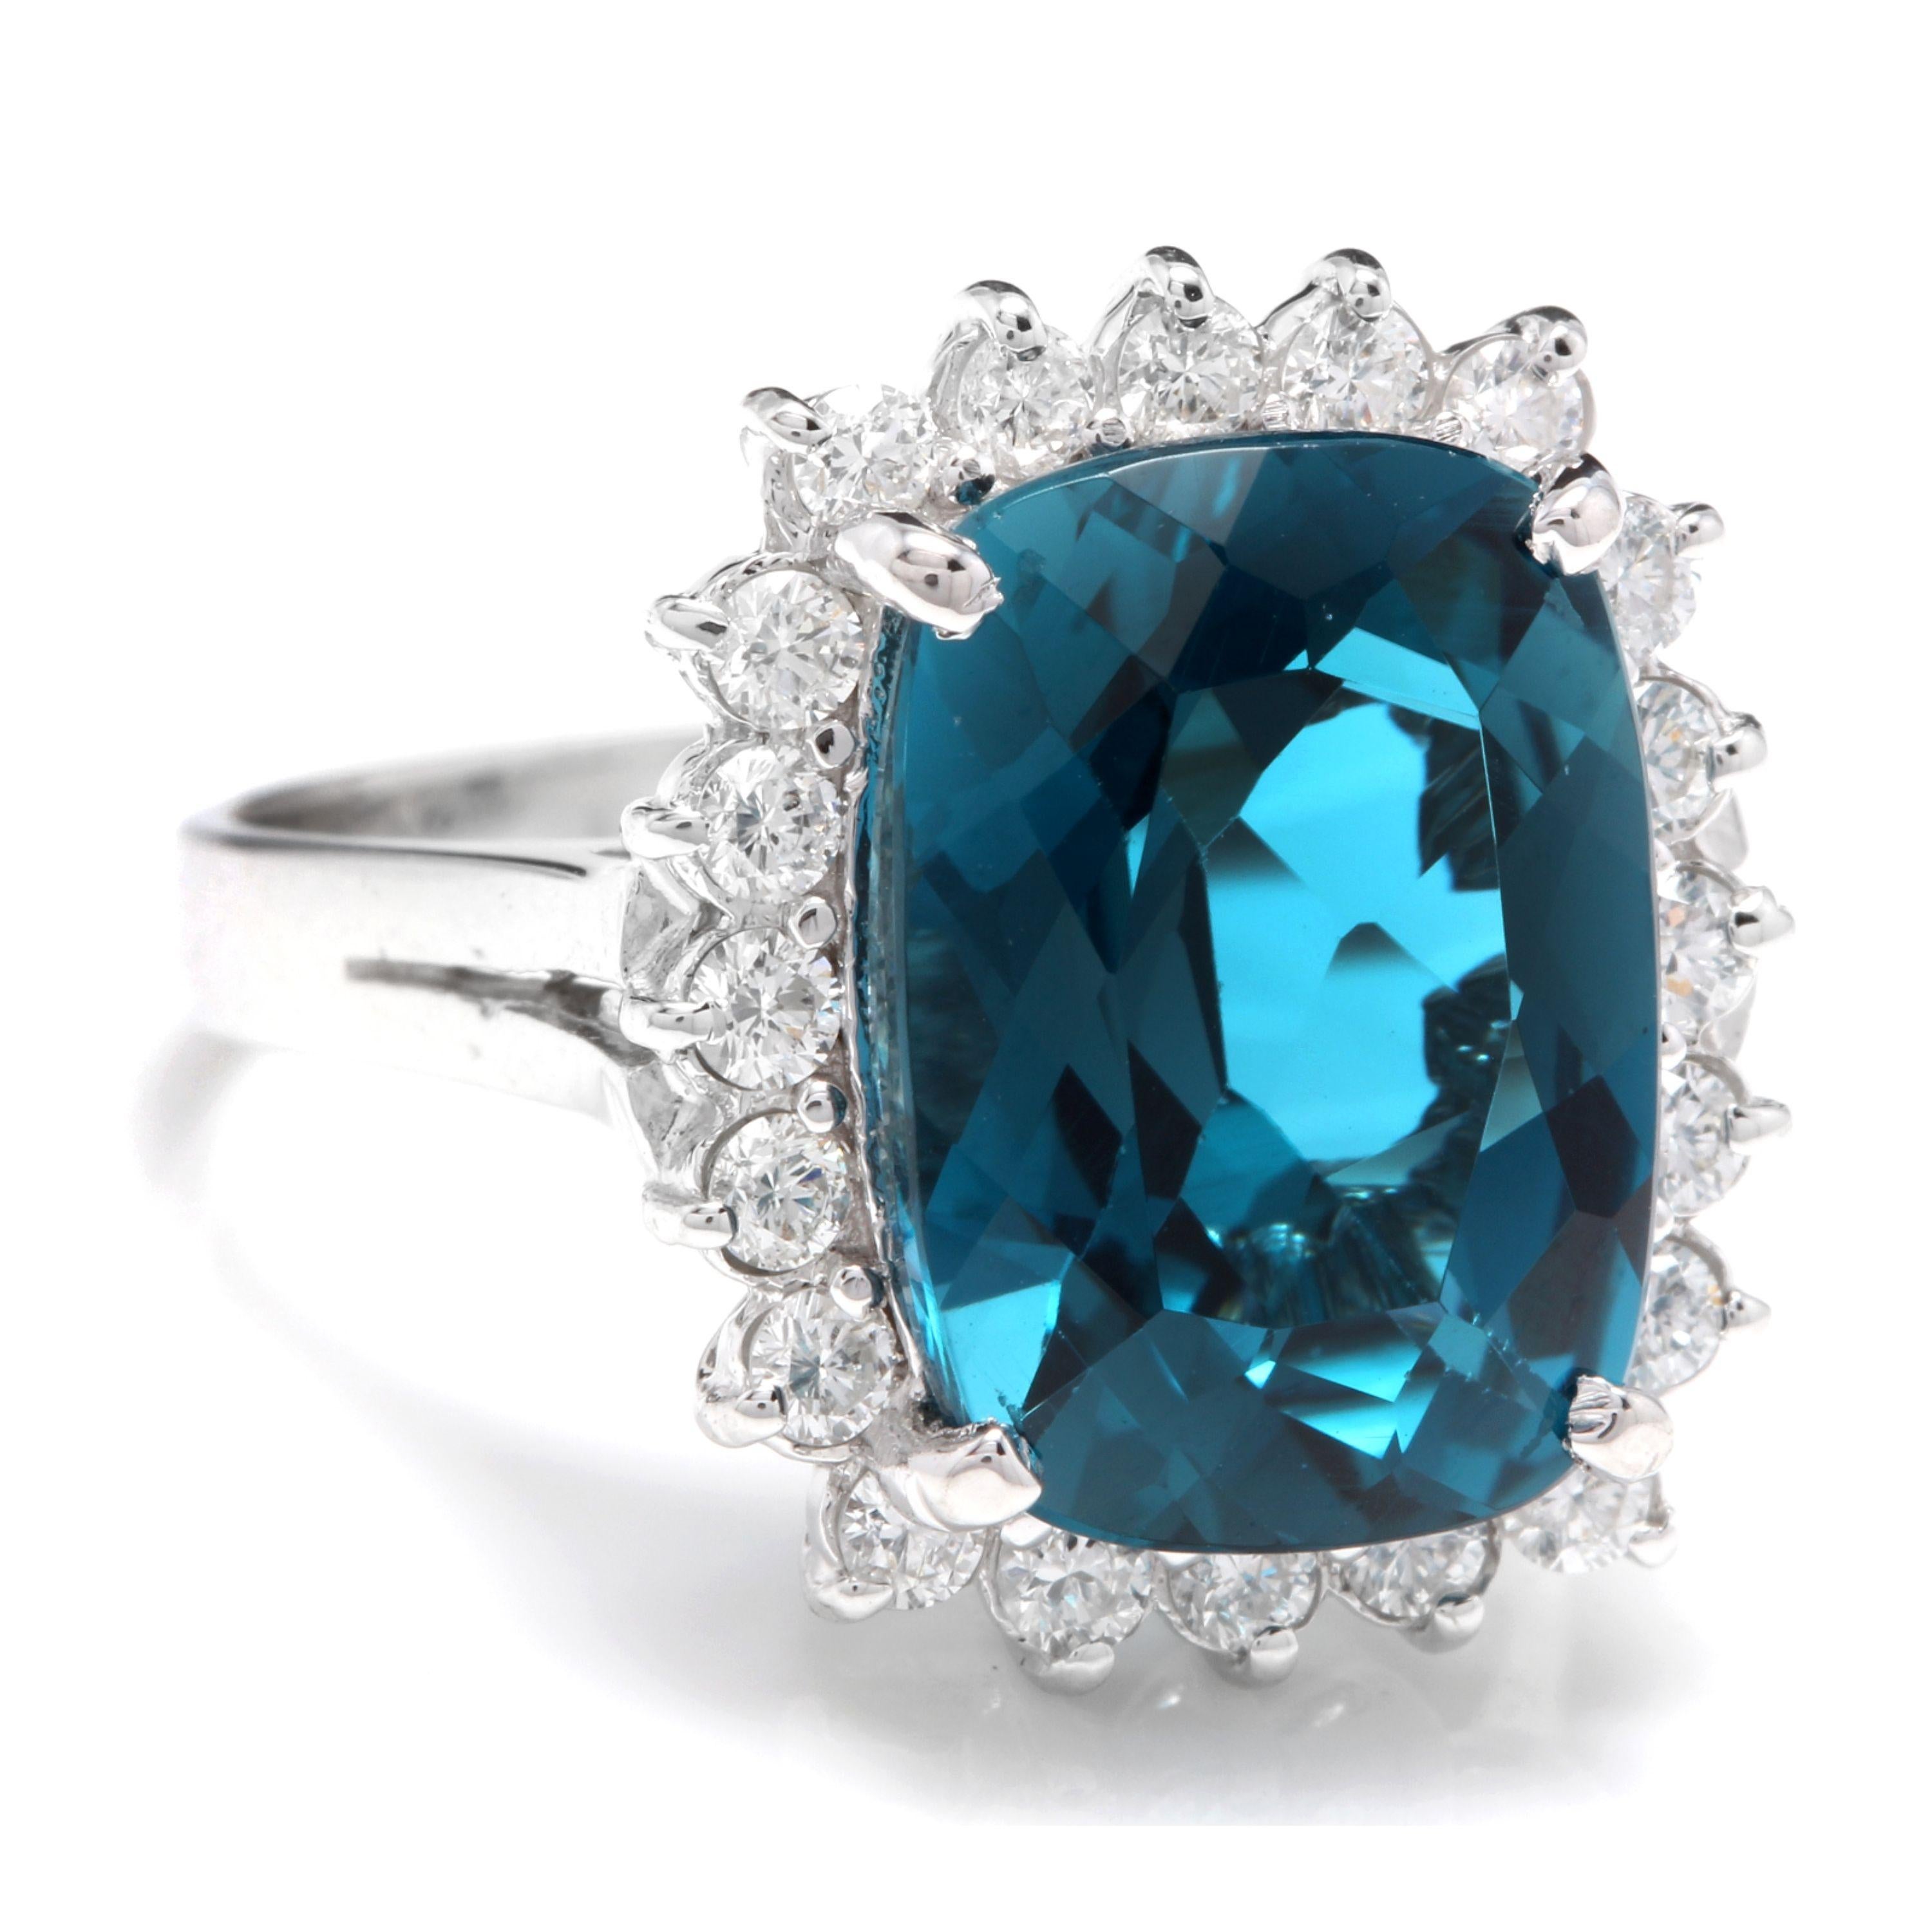 13.00Carats Natural Impressive London Blue Topaz and Diamond 14K White Gold Ring

Total Natural London Blue Topaz Weight: Approx. 12.00 Carats

London Blue Topaz Measures: Approx. 16 x 12mm

Natural Round Diamonds Weight: Approx. 1.00 Carat (color